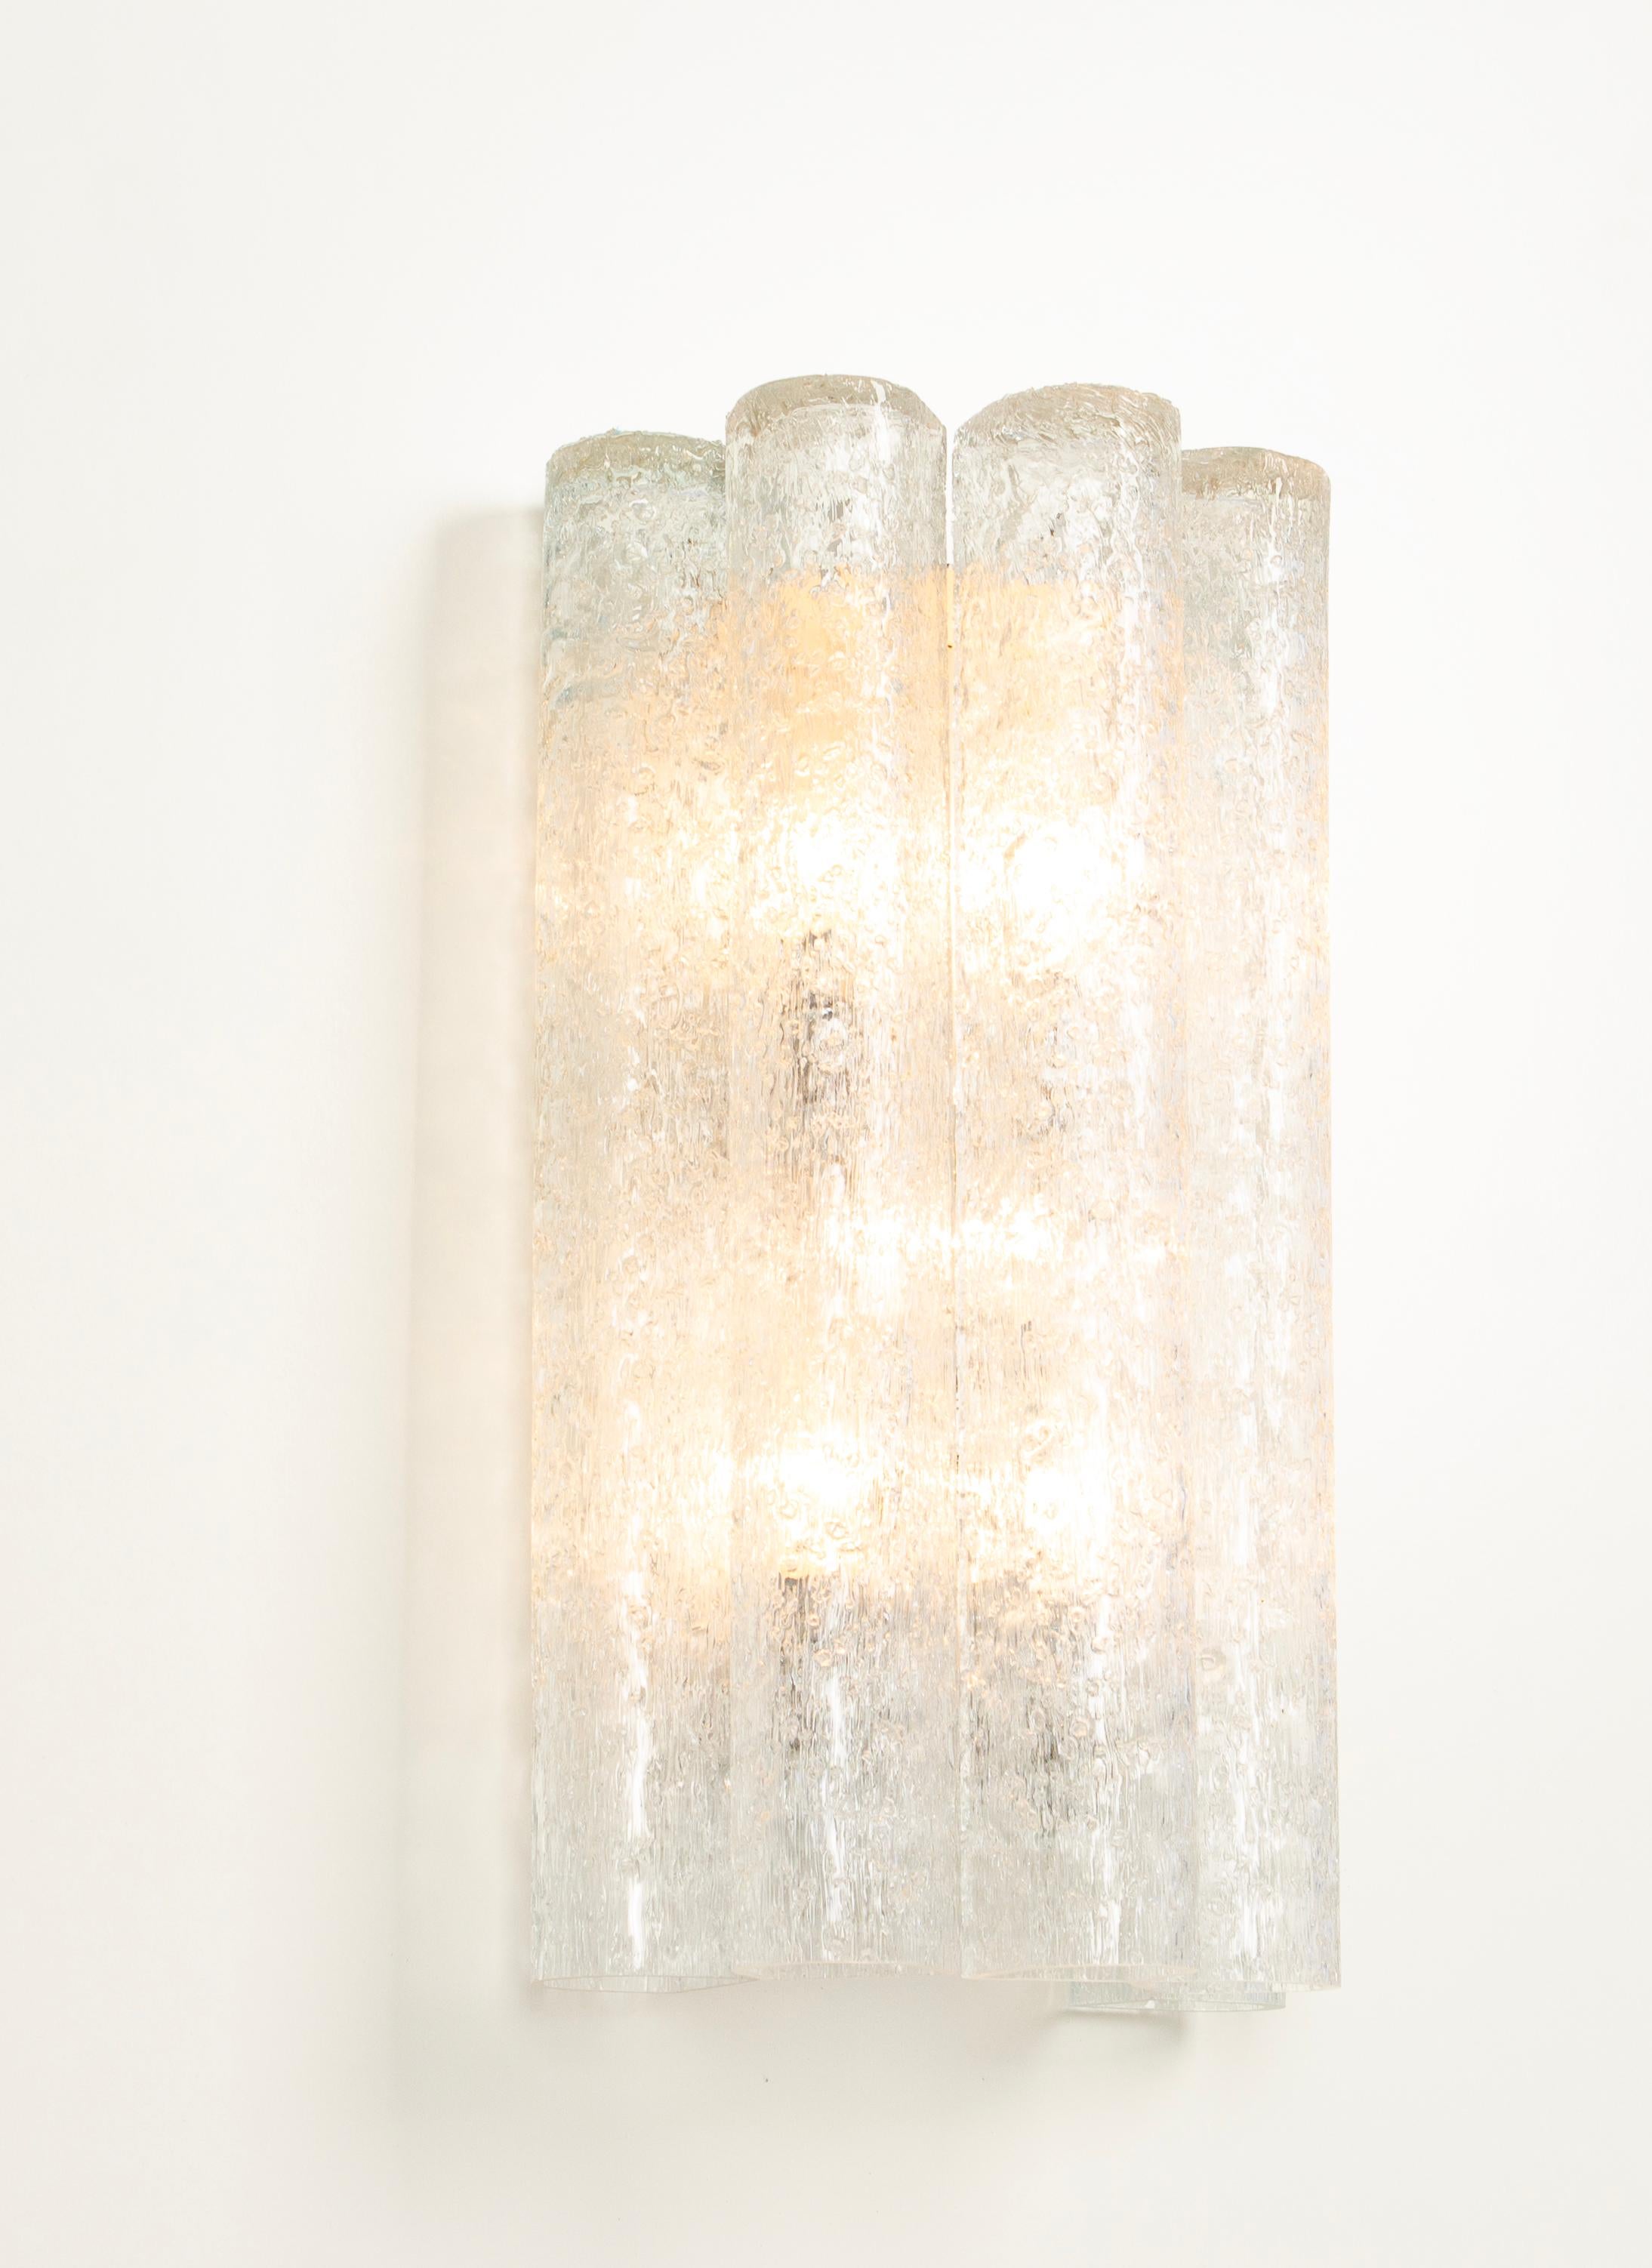 Metal 1 of 8 Sets /Large Pair of murano Glass Wall Sconces by Doria, Germany, 1960s For Sale